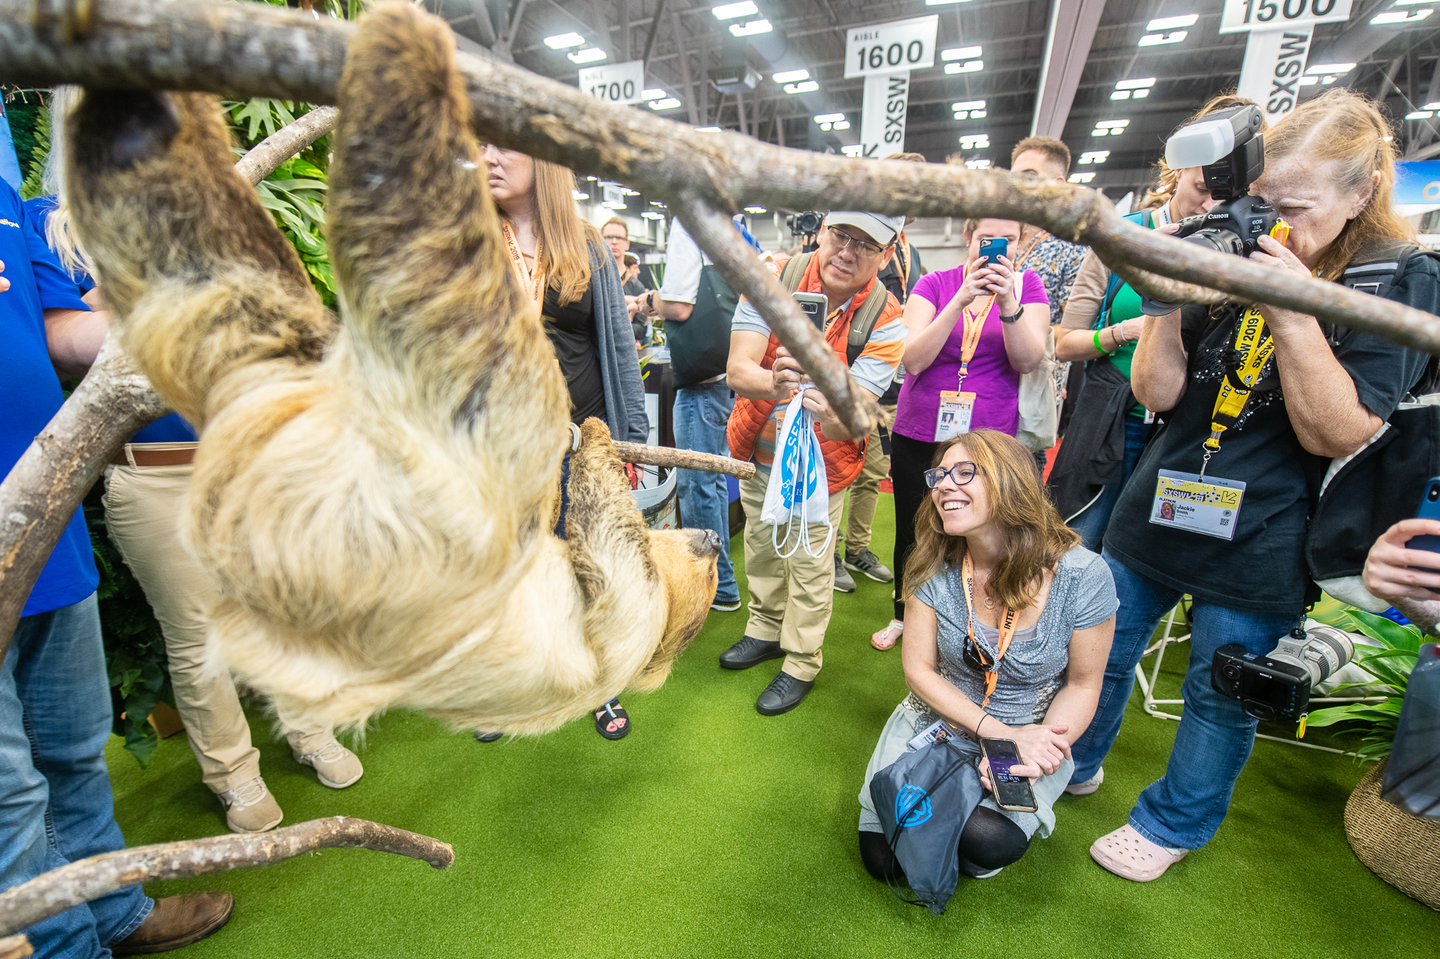 Sloths made a brief visit to the Calm booth on the first day of the SXSW Trade Show.